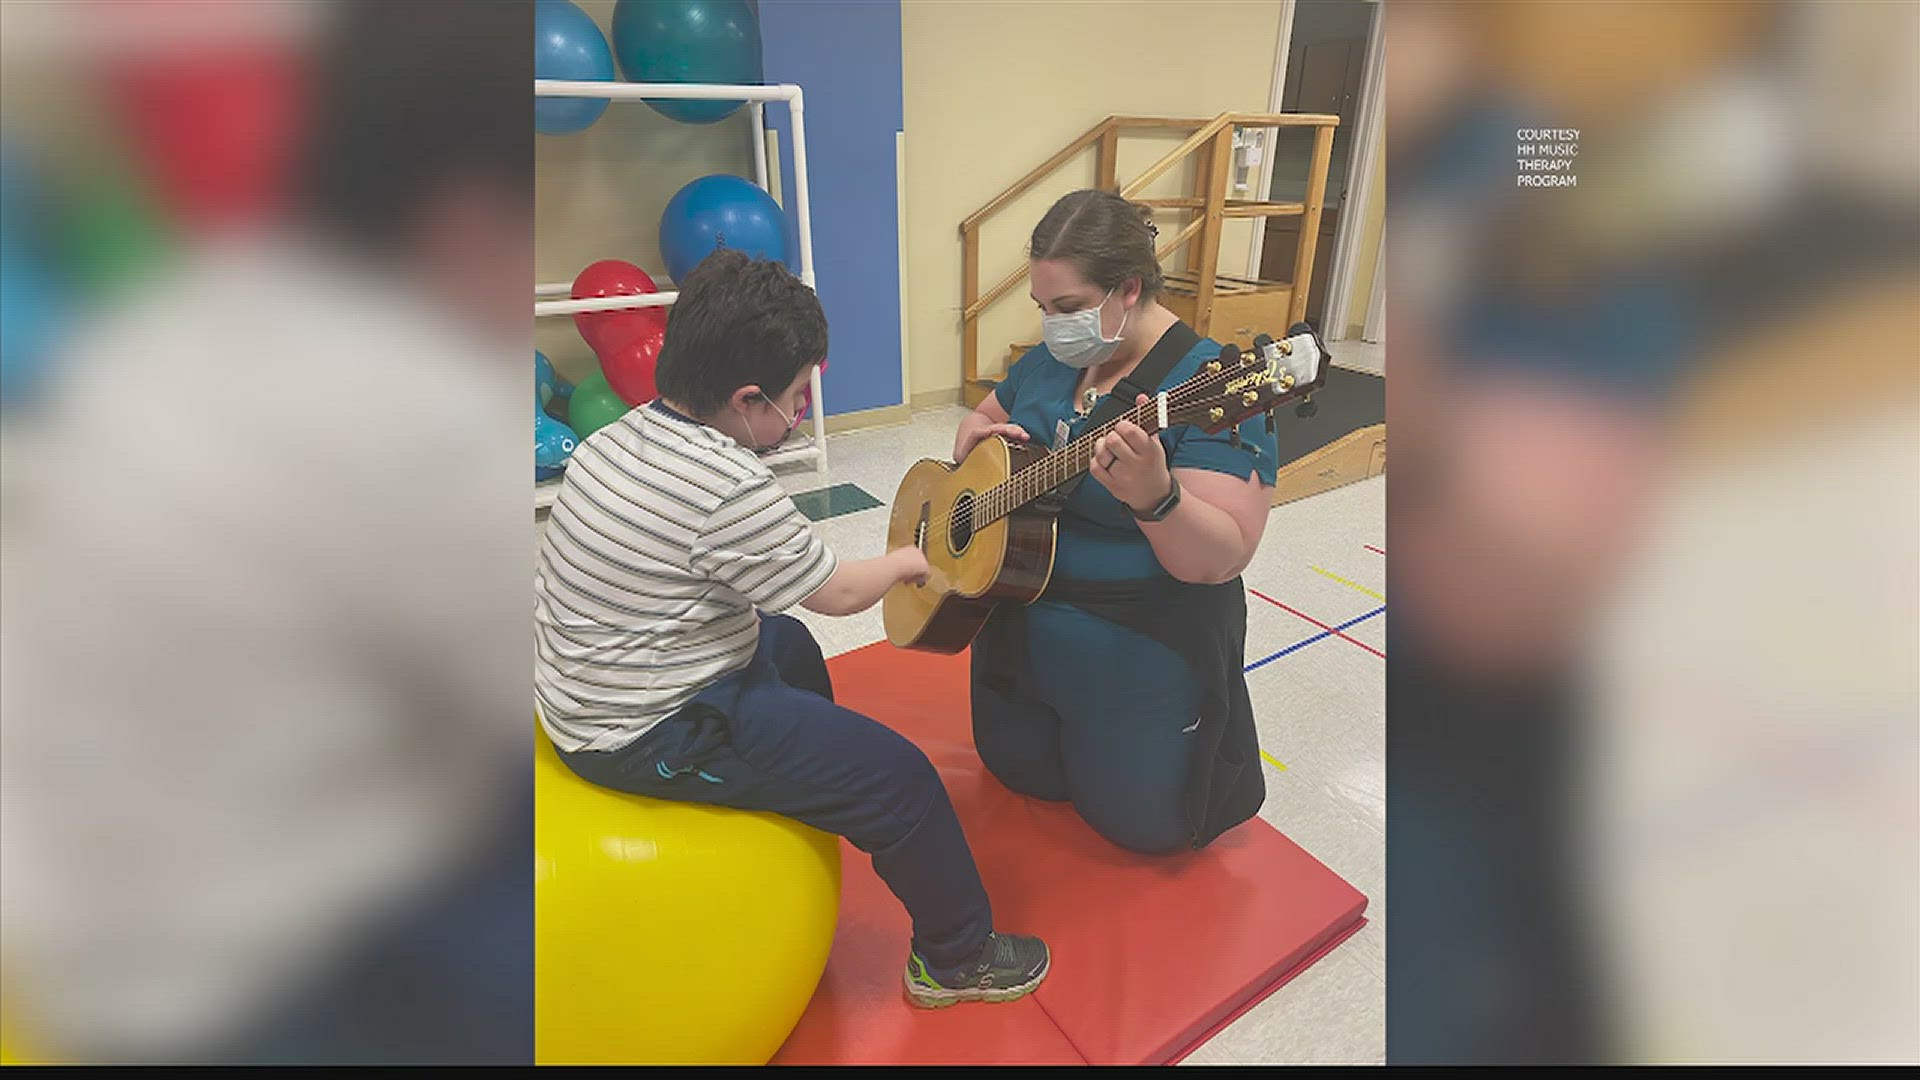 Huntsville Hospital's Music Therapy Program touches the lives of patients from hospice to NICU to pediatrics.